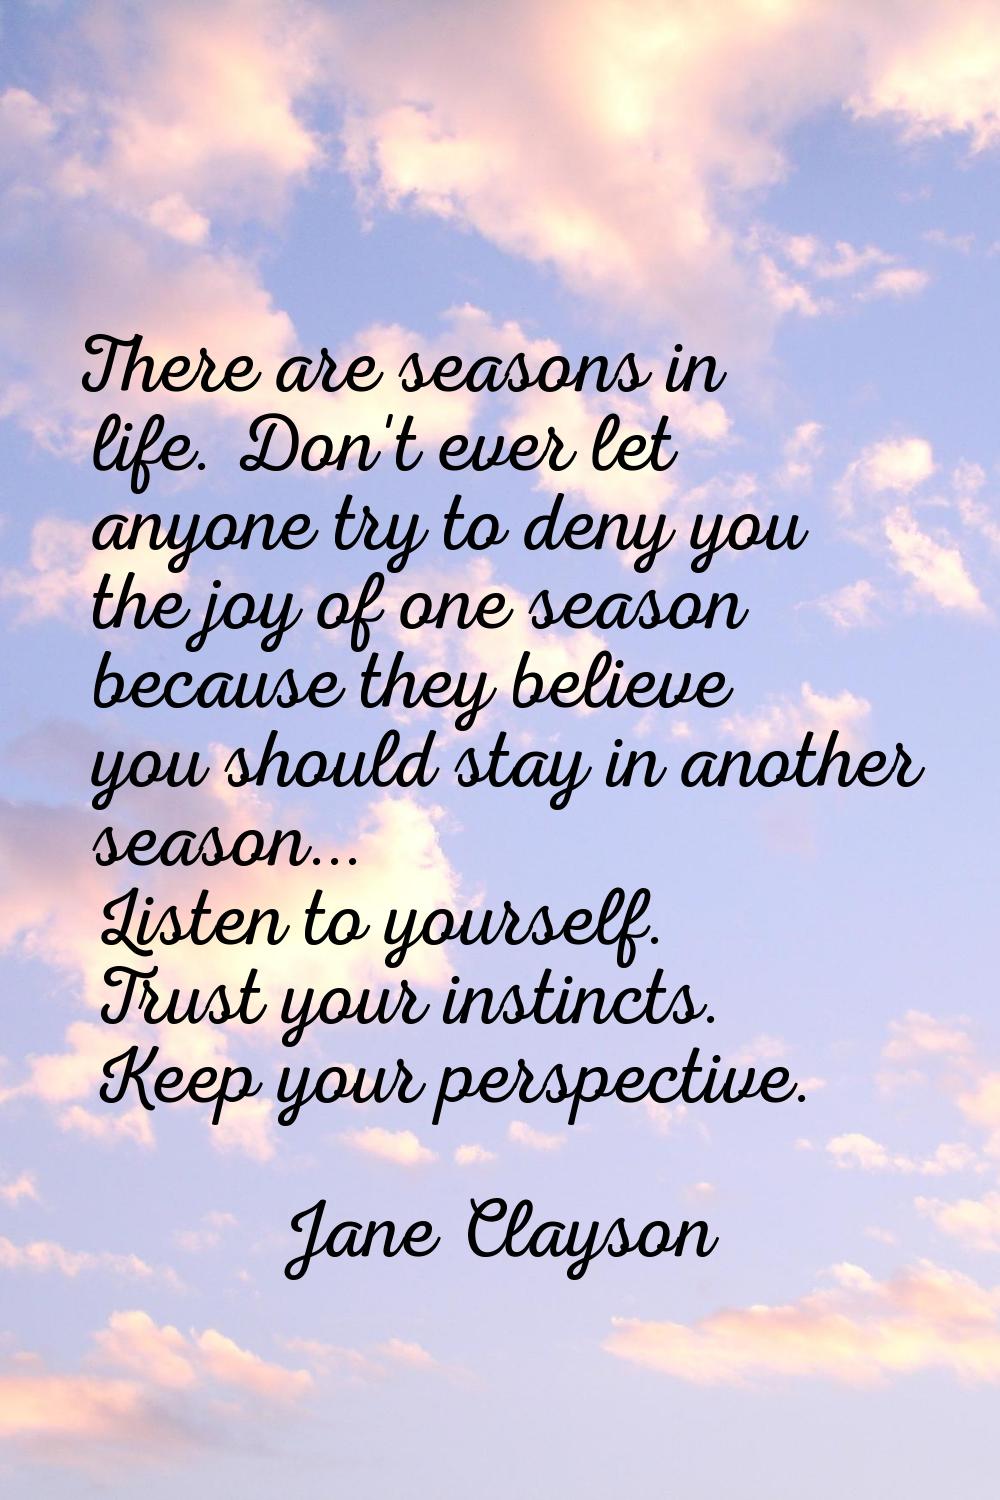 There are seasons in life. Don't ever let anyone try to deny you the joy of one season because they